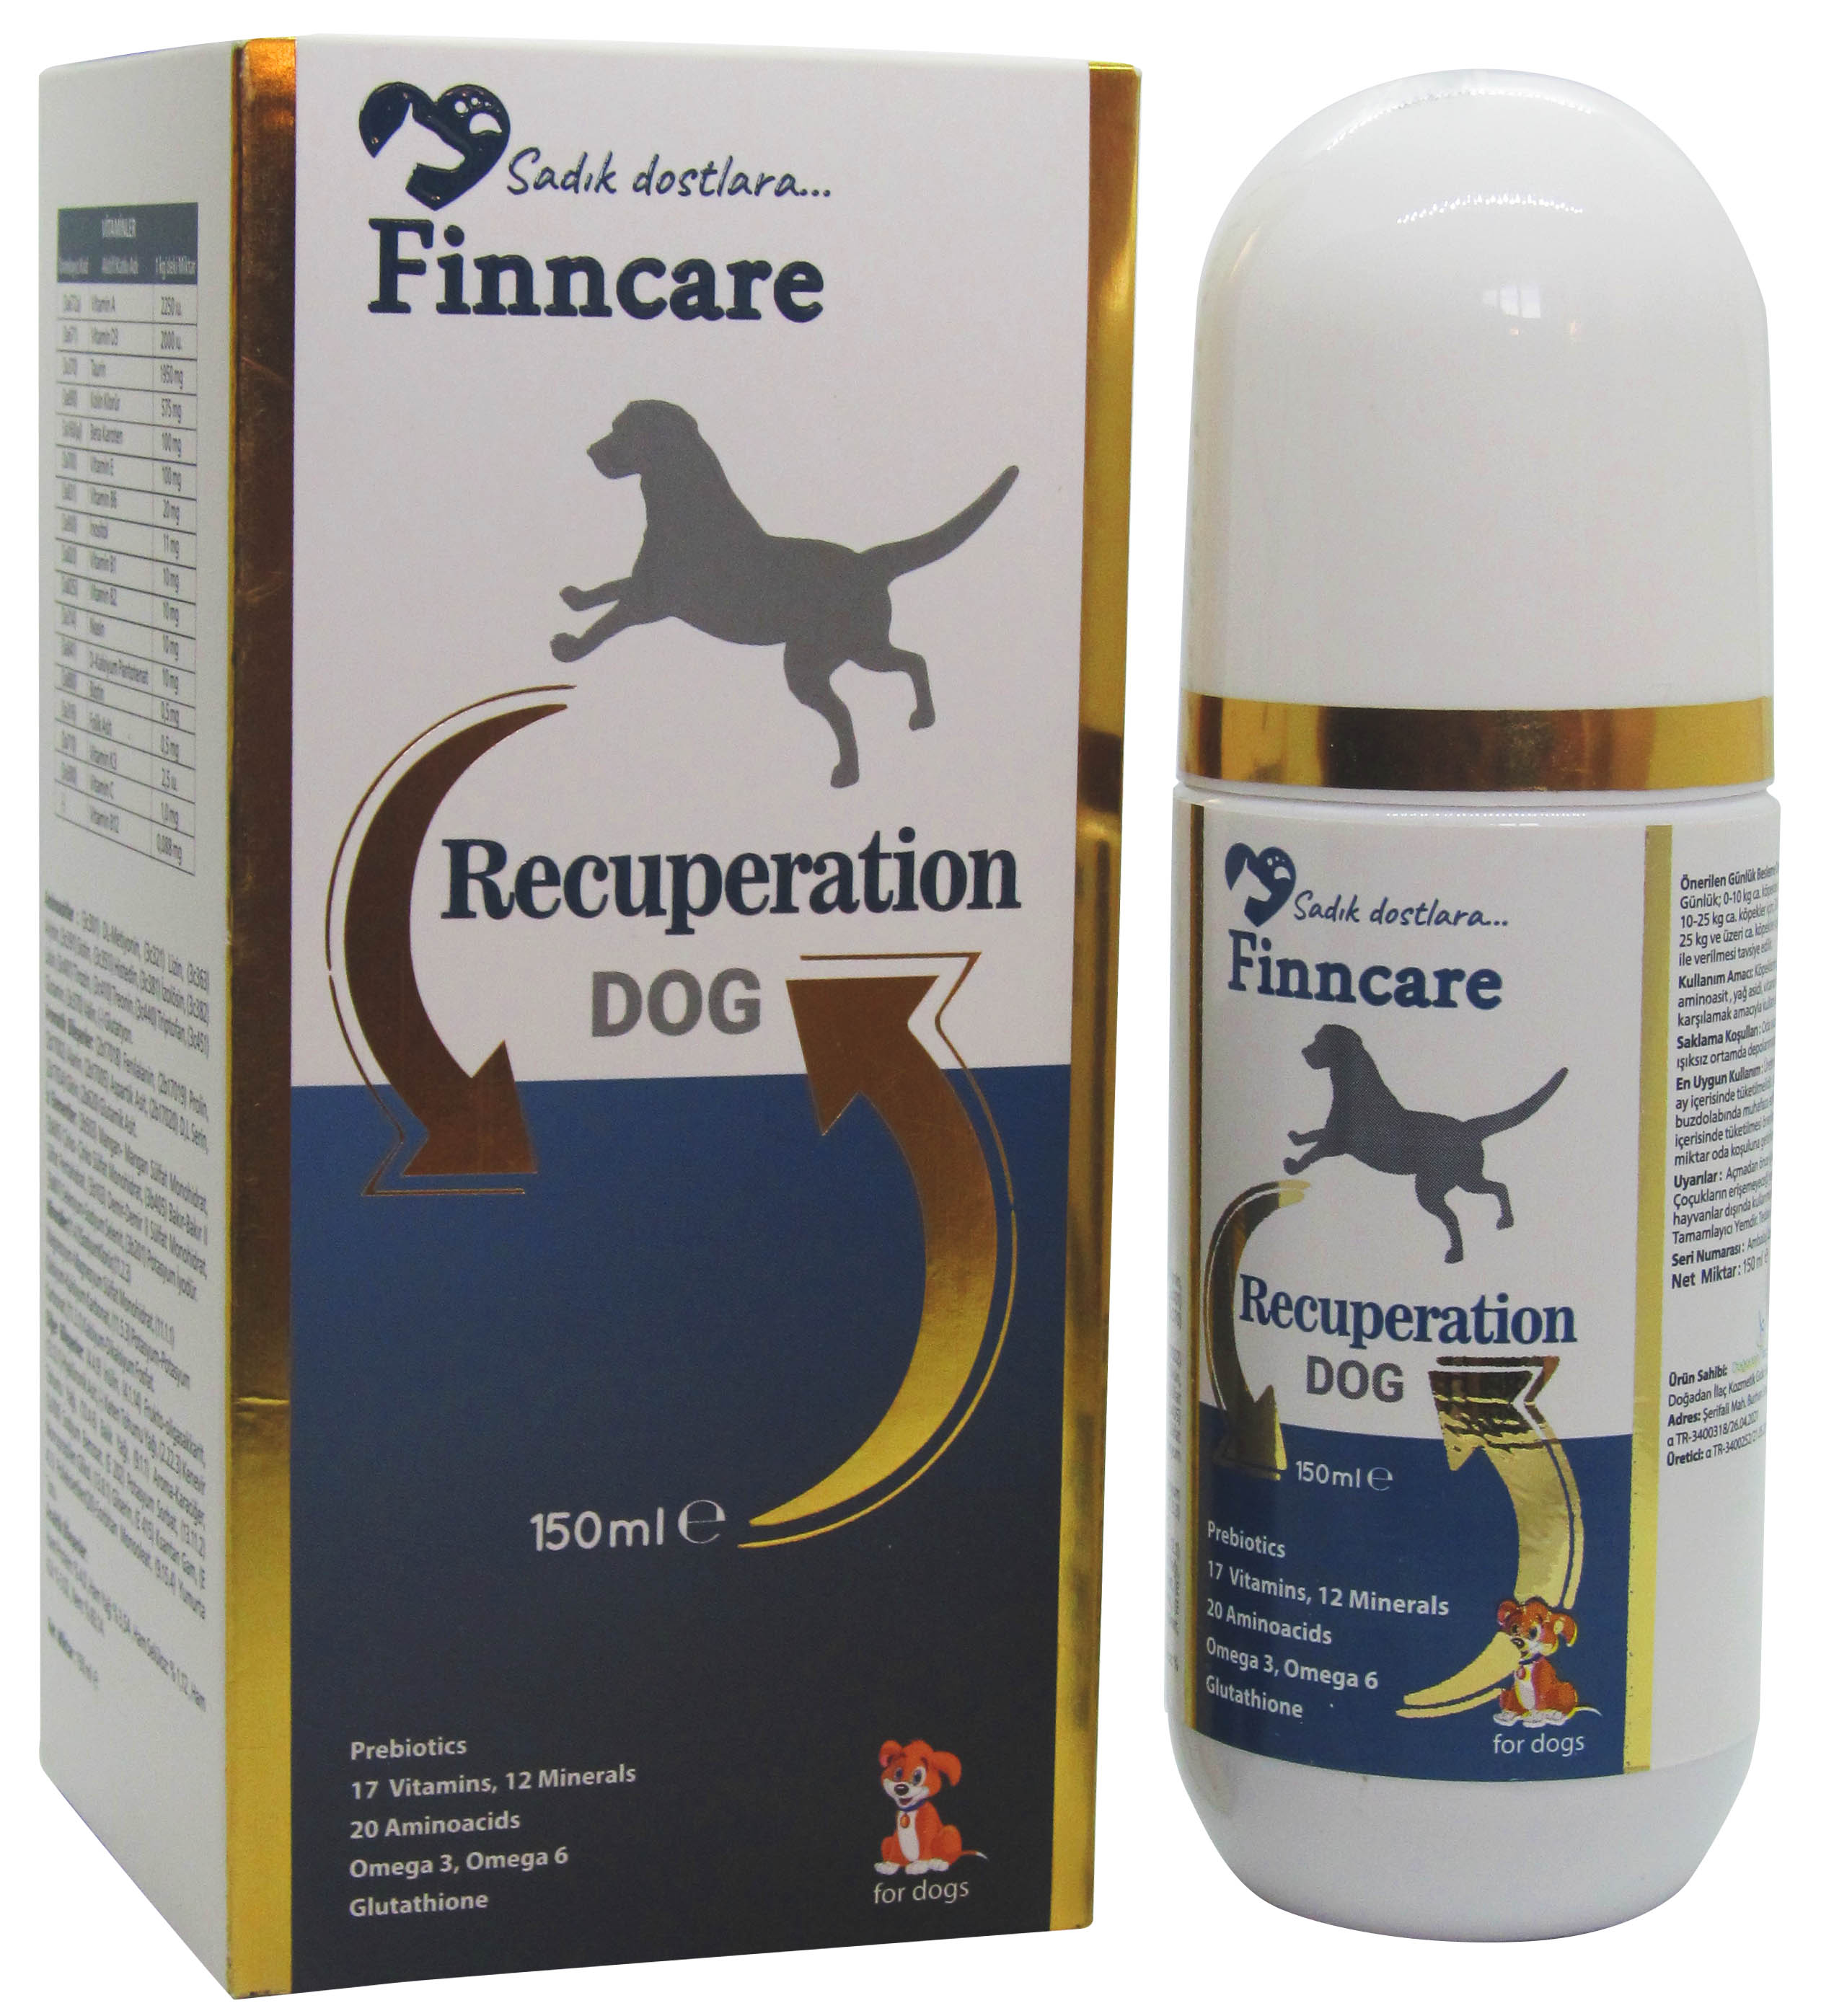 Finncare Recuperation